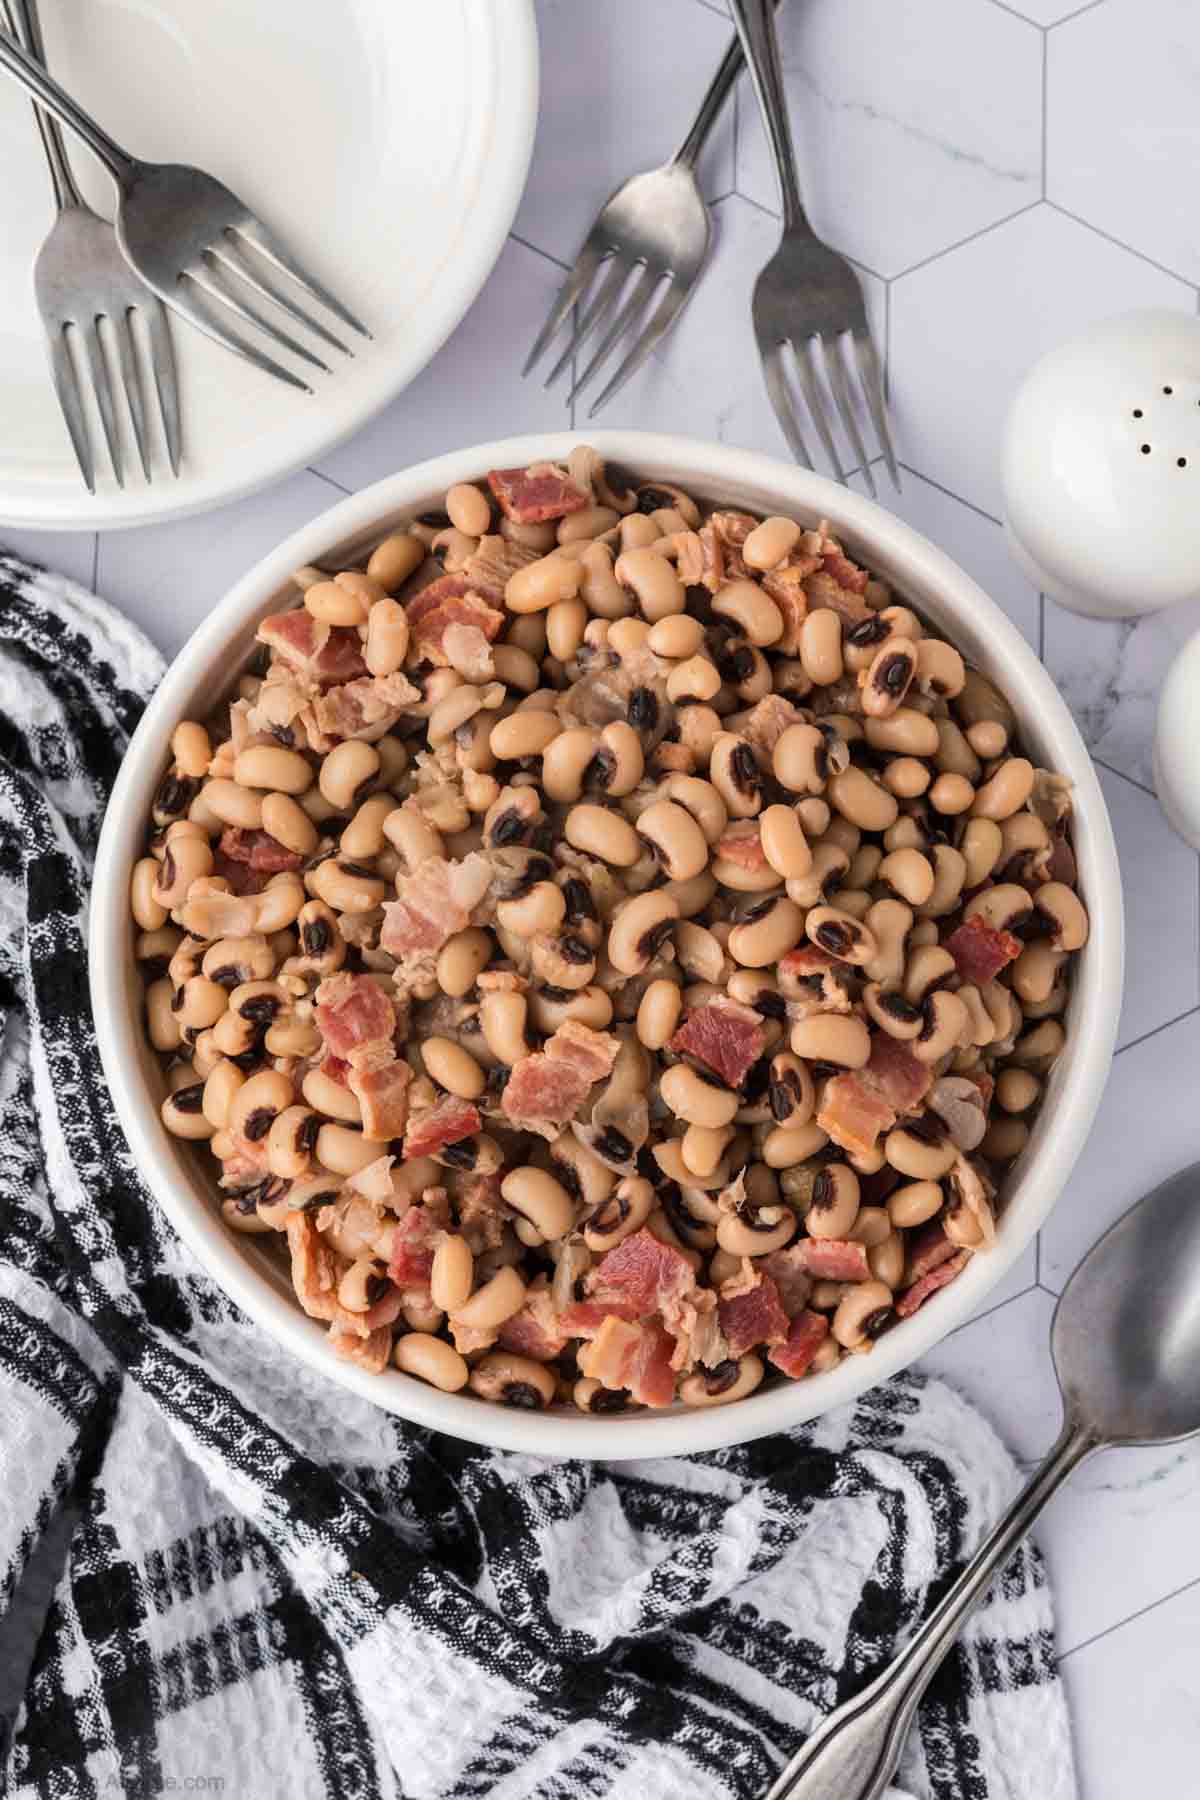 Blacked Eyed Peas in a white bowl